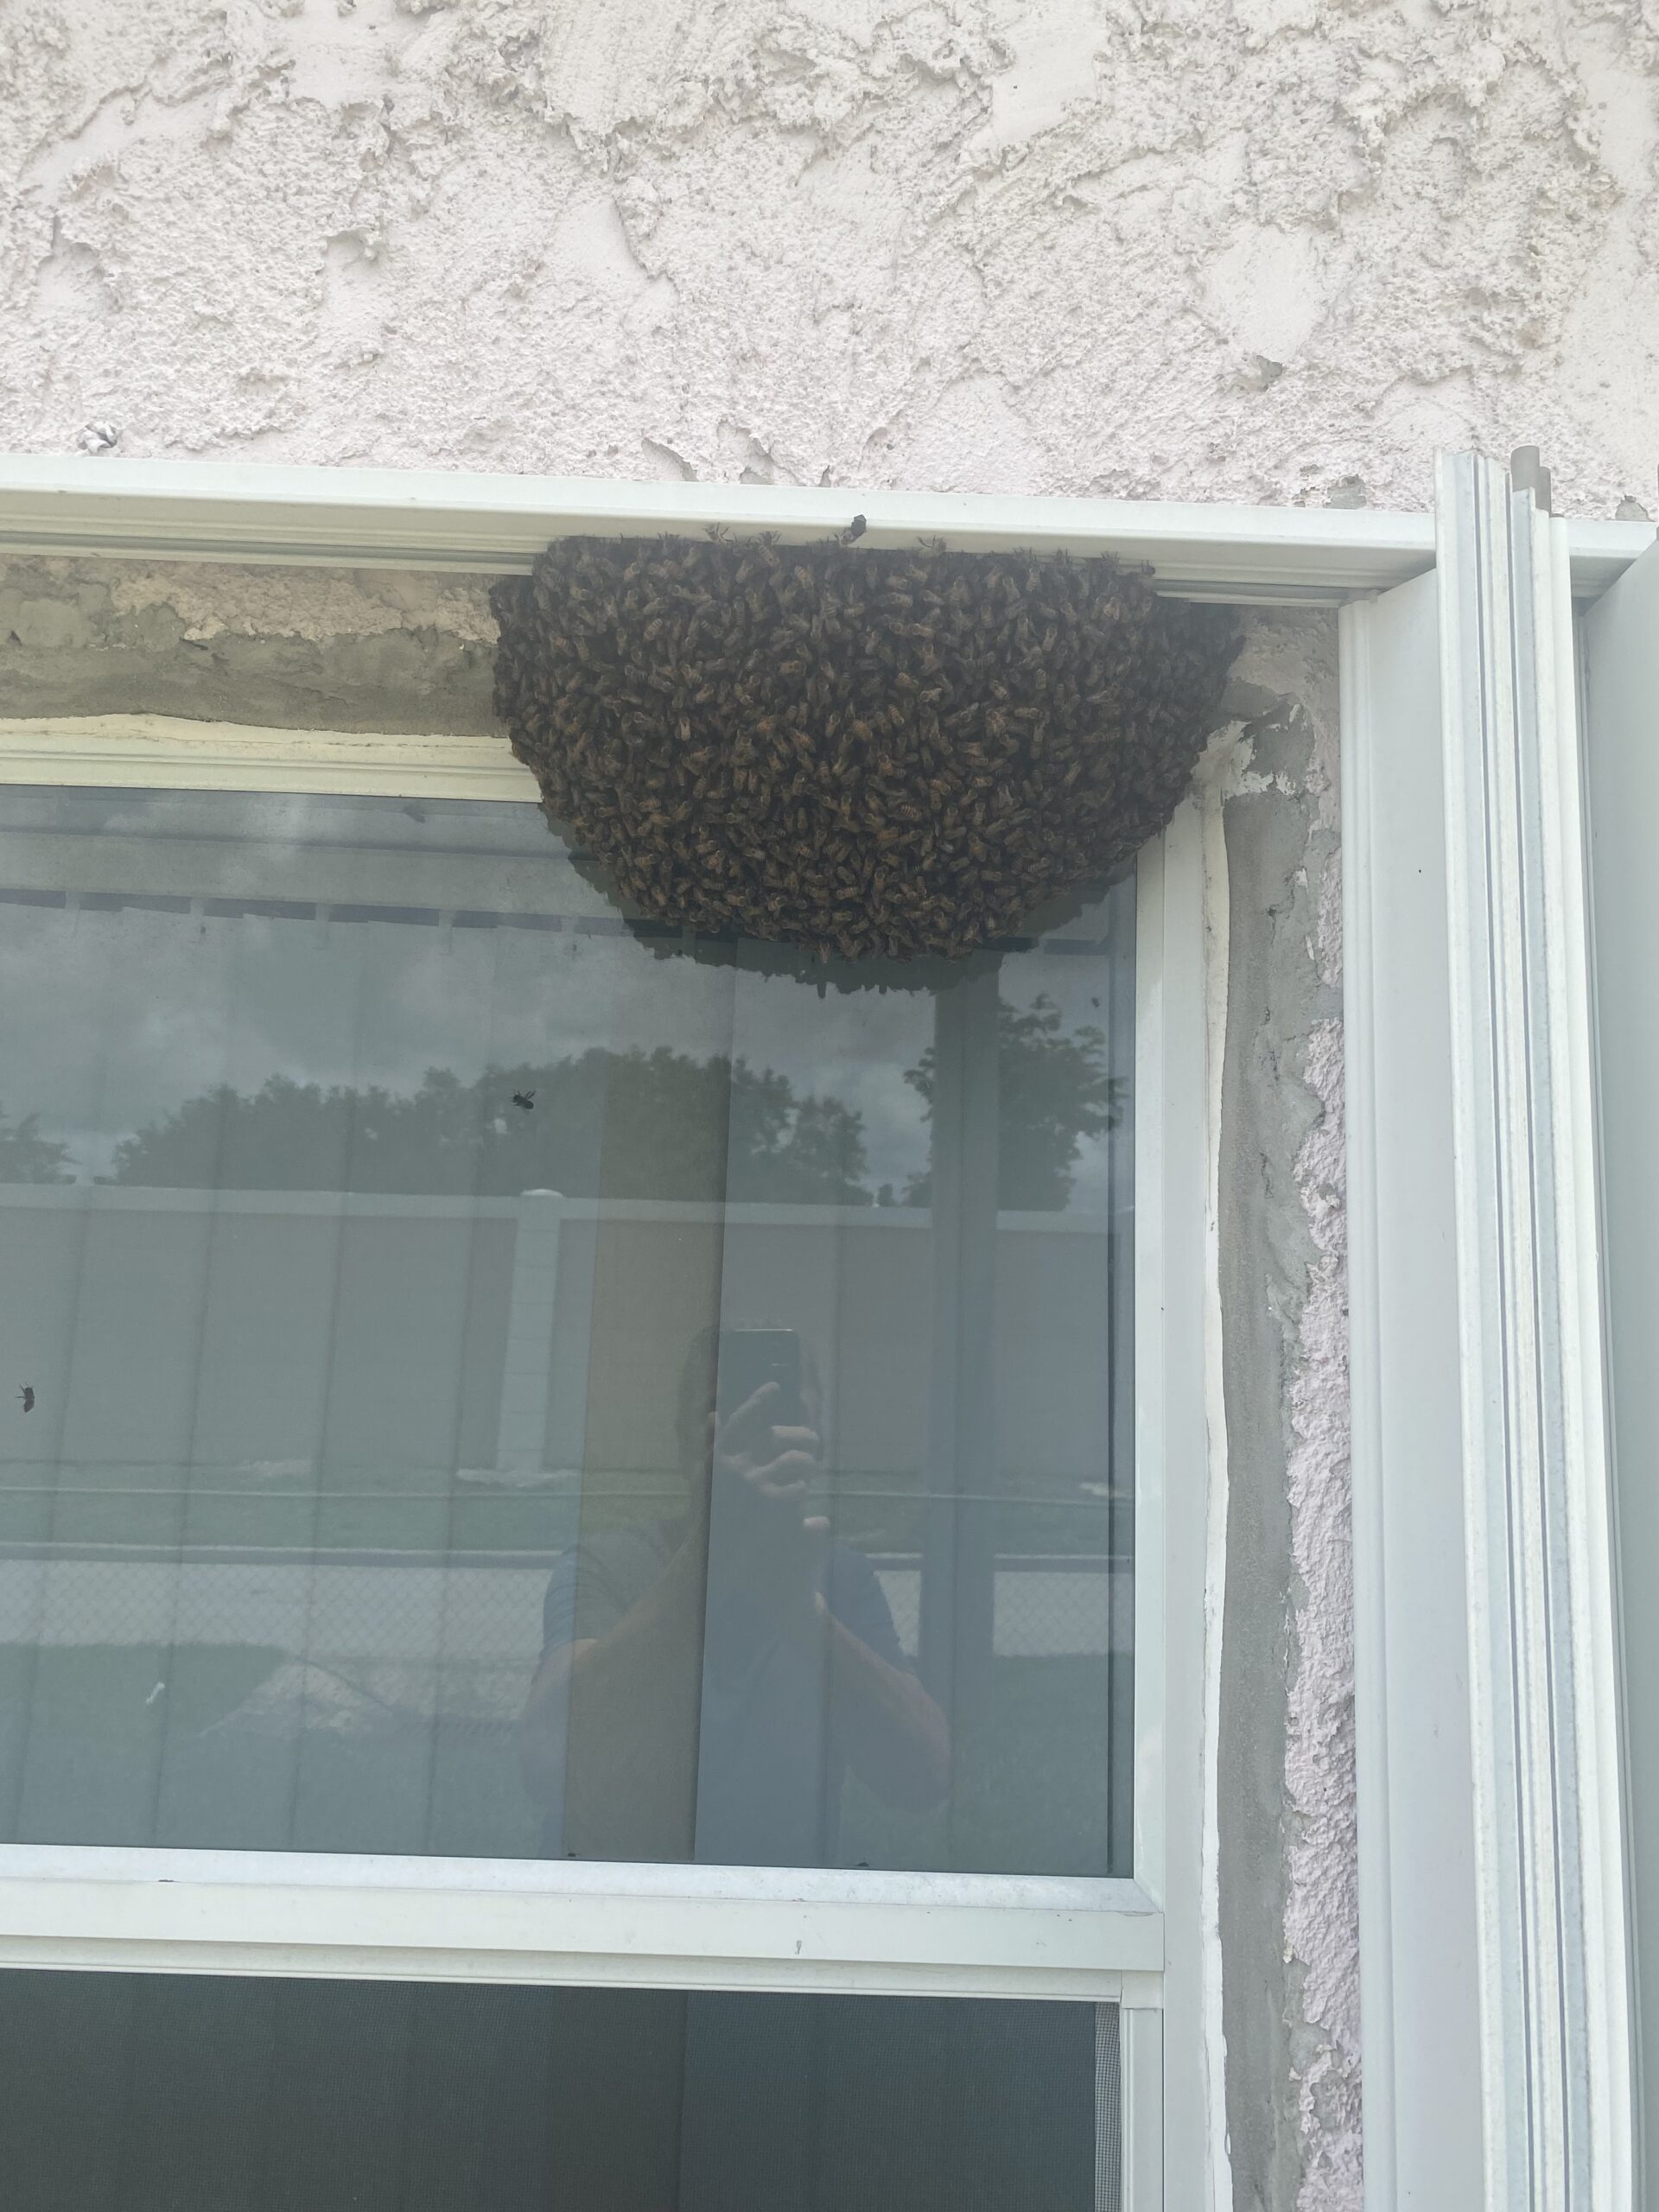 bee hive on the side of window